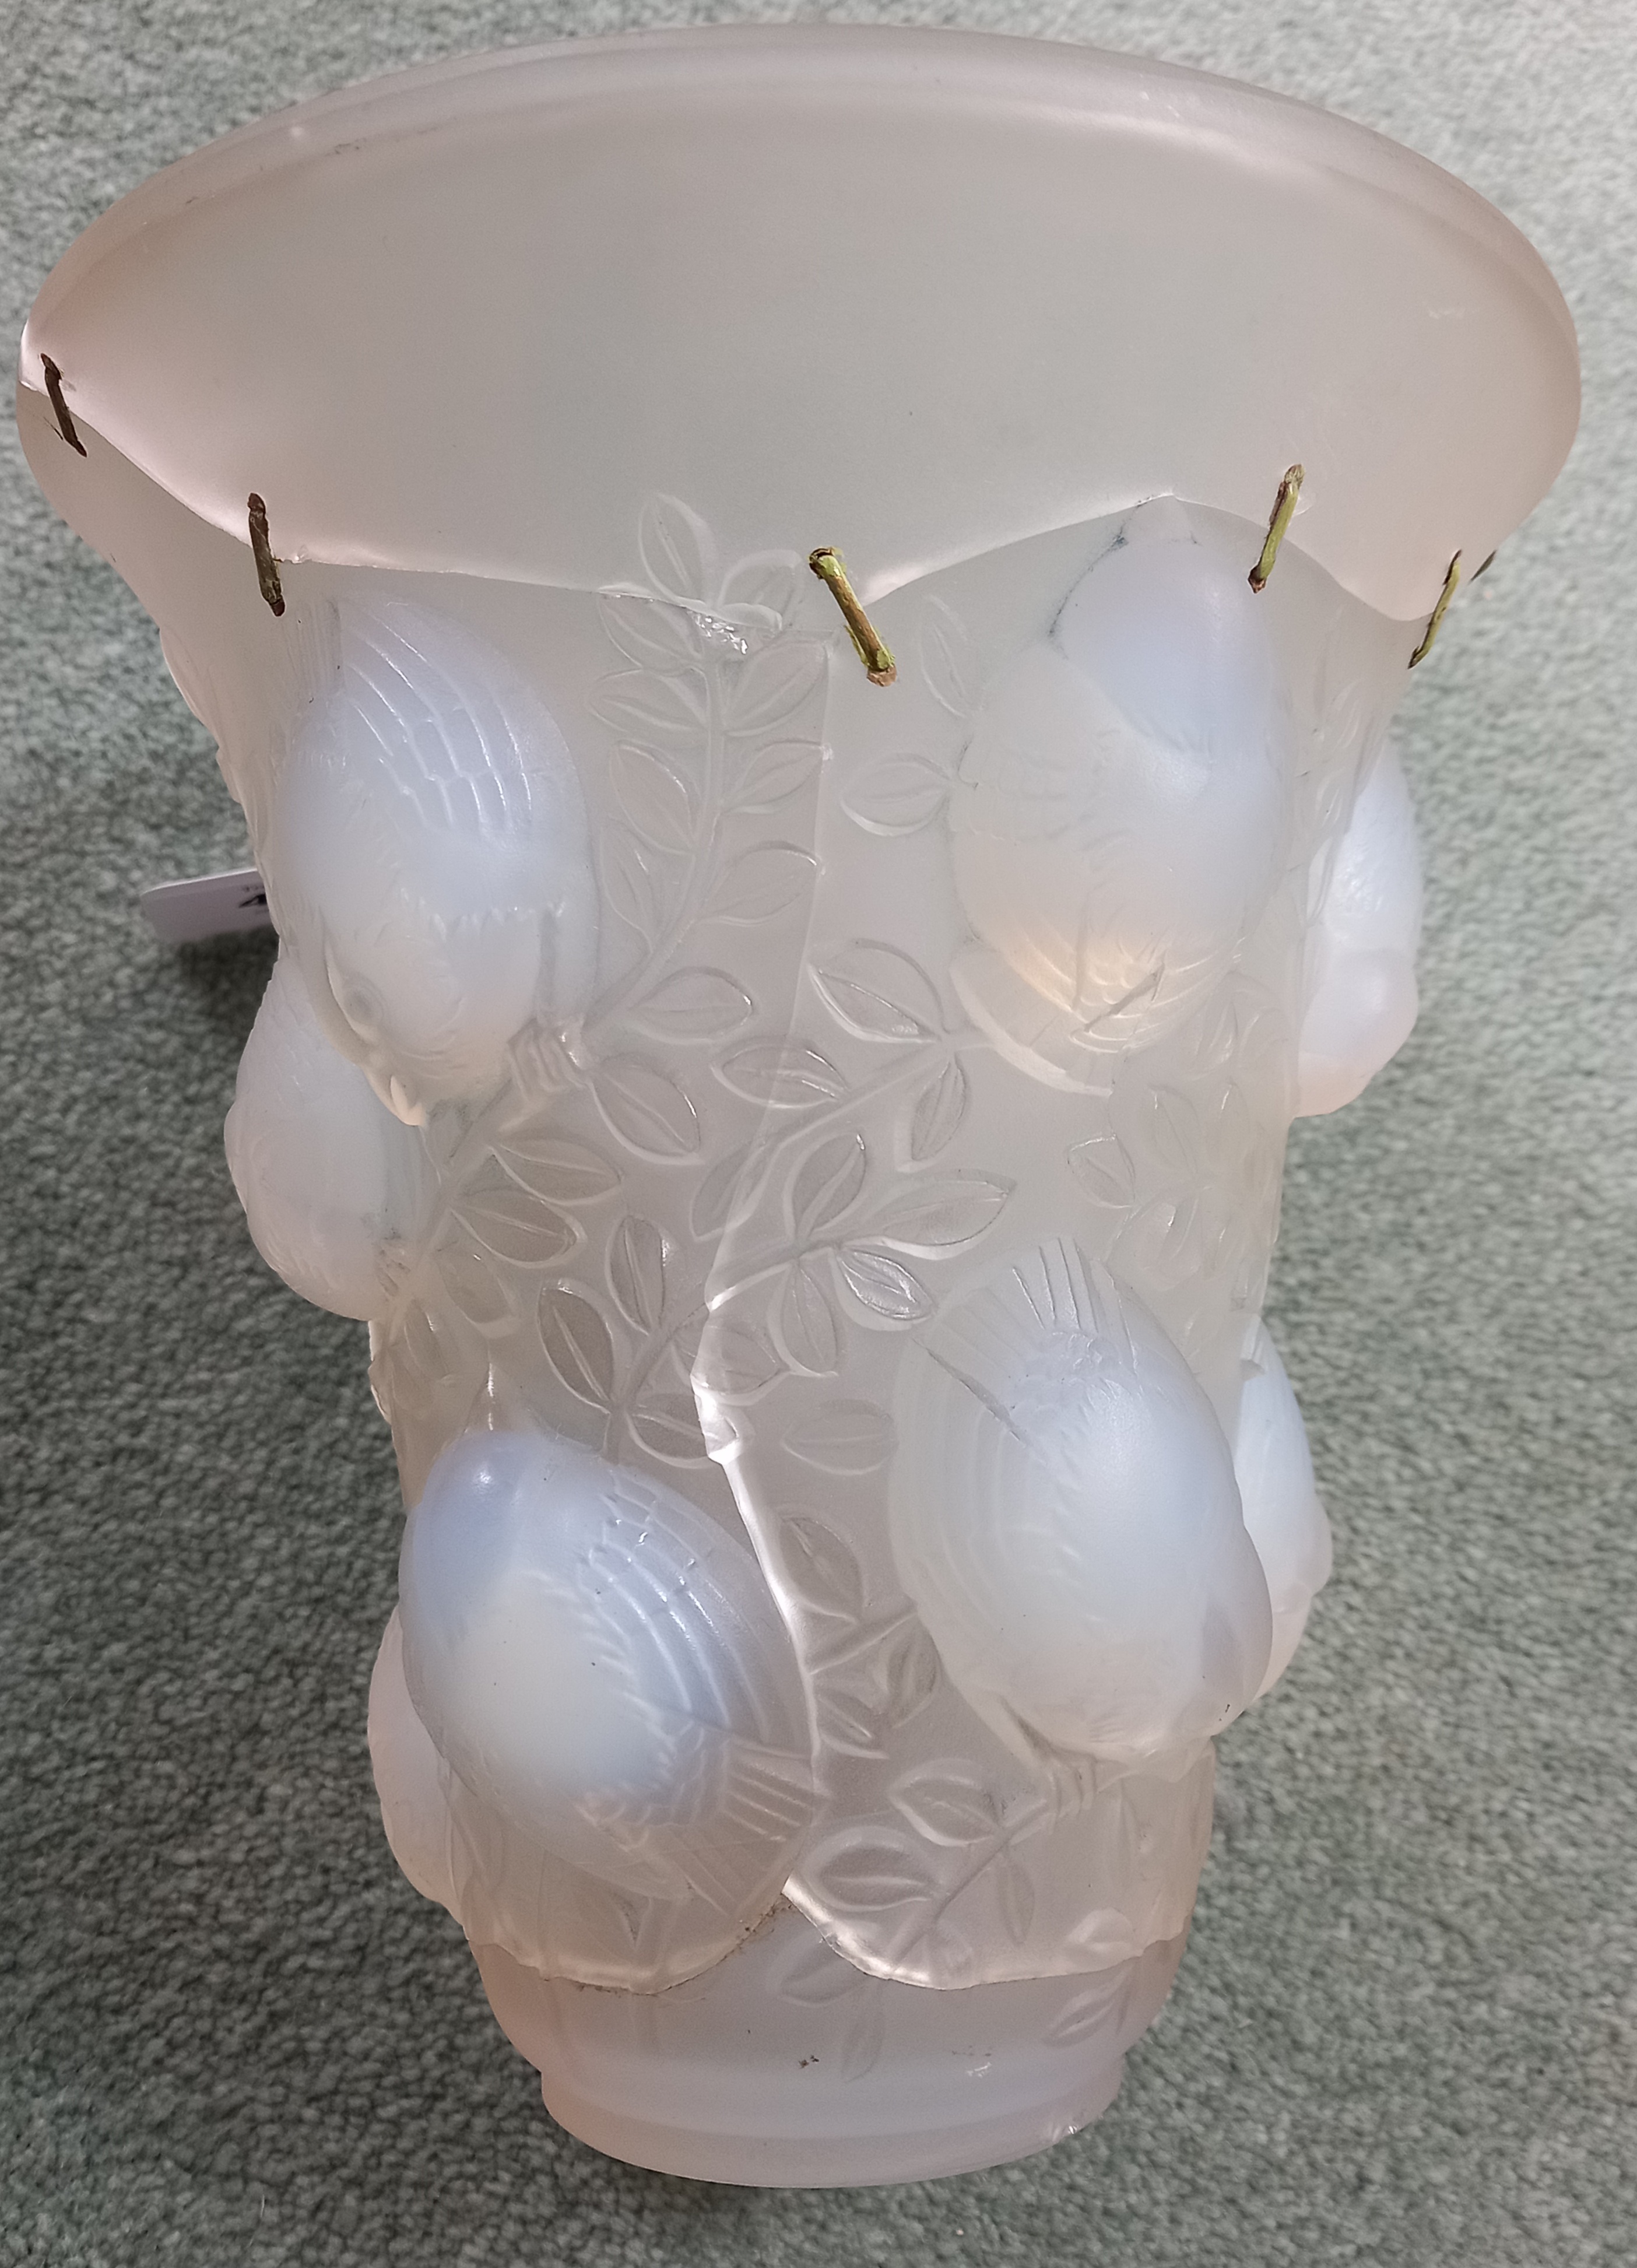 A Rene Lalique (French, 1860-1945) "Saint Francois" opalescent glass vase, the body relief moulded - Image 5 of 6